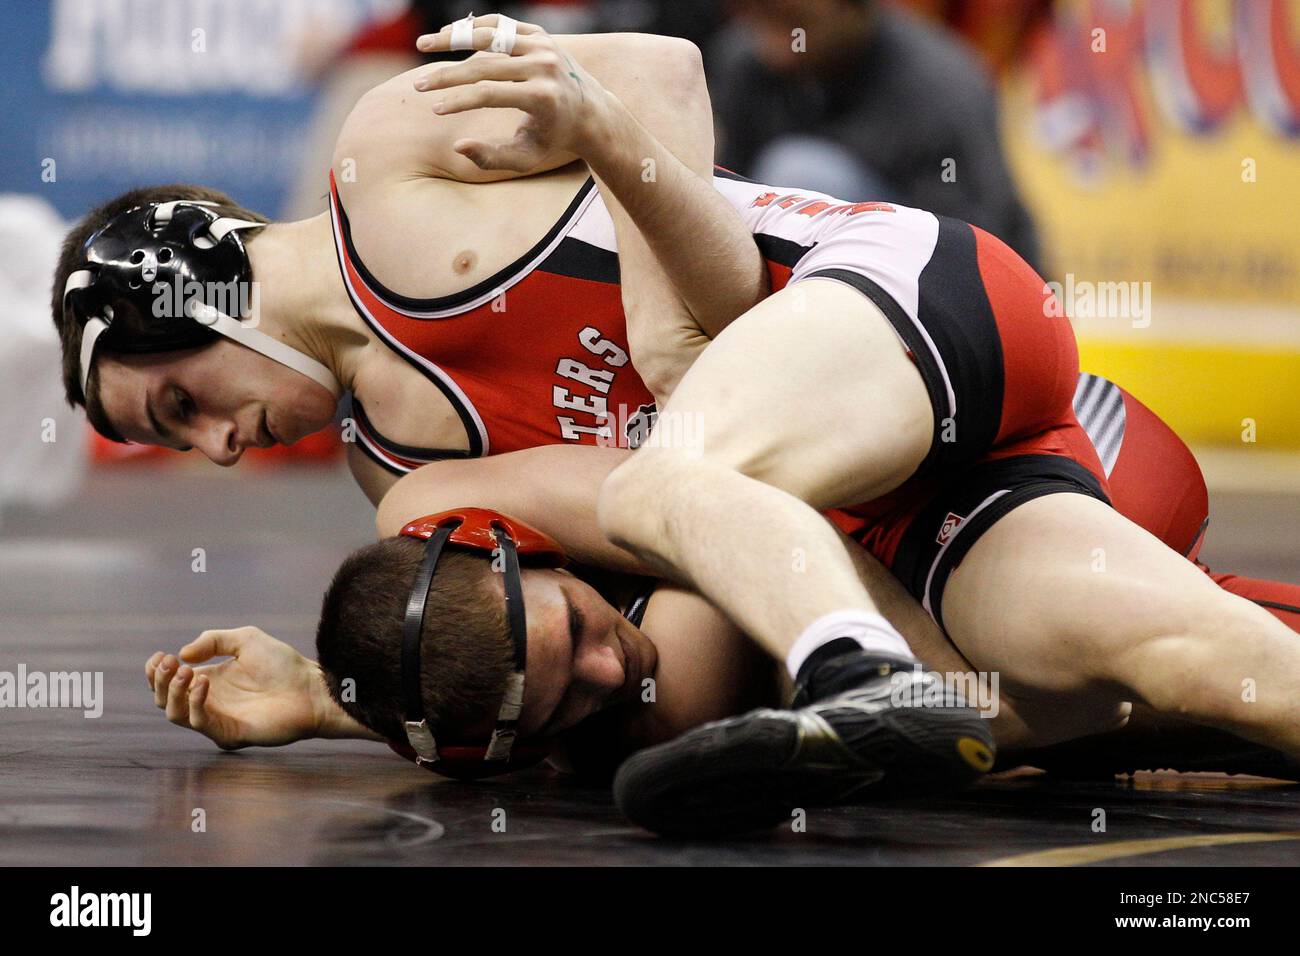 Hatboro Horshams Matt Harkins, top, wresltes with Waynesburgs Derrick Nelson during their Class AAA 119-pound quarterfinal match, Friday, March 11, 2011, at the PIAA High School Wrestling Championships in Hershey, Pa